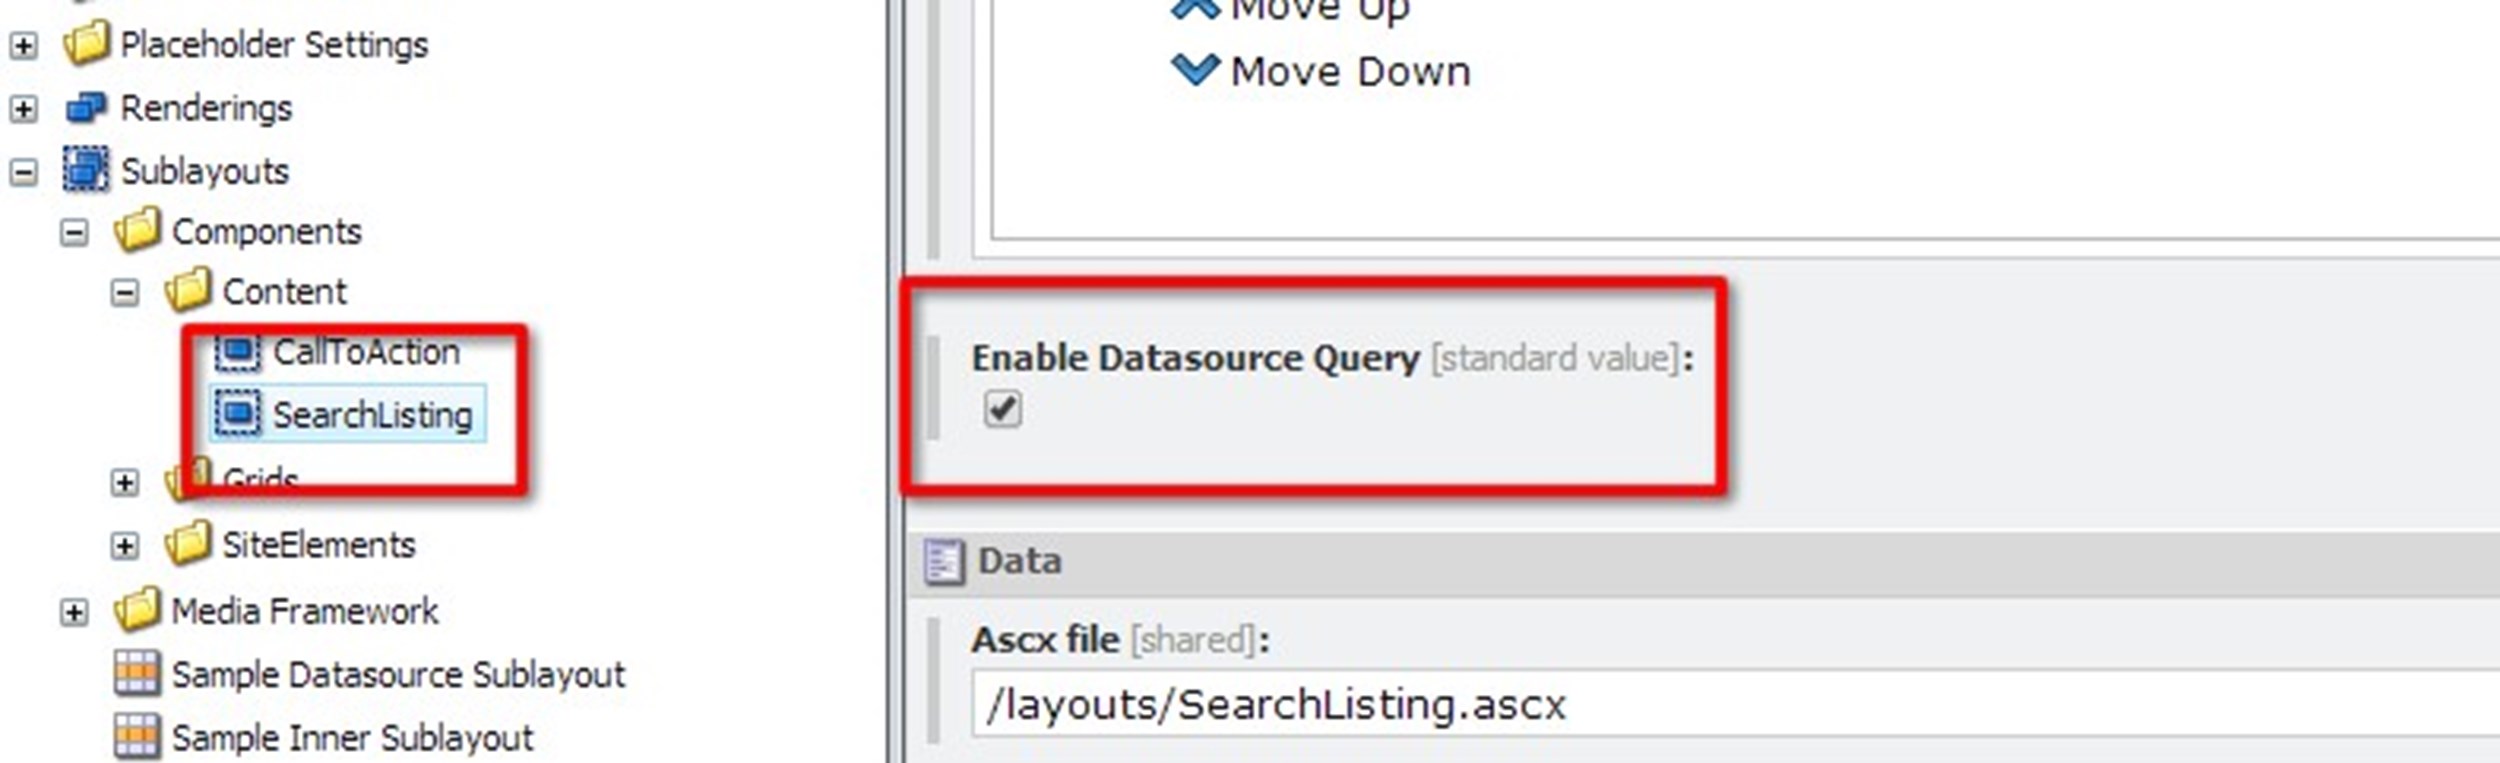 10Sitecore components- enable datasource query.jpg